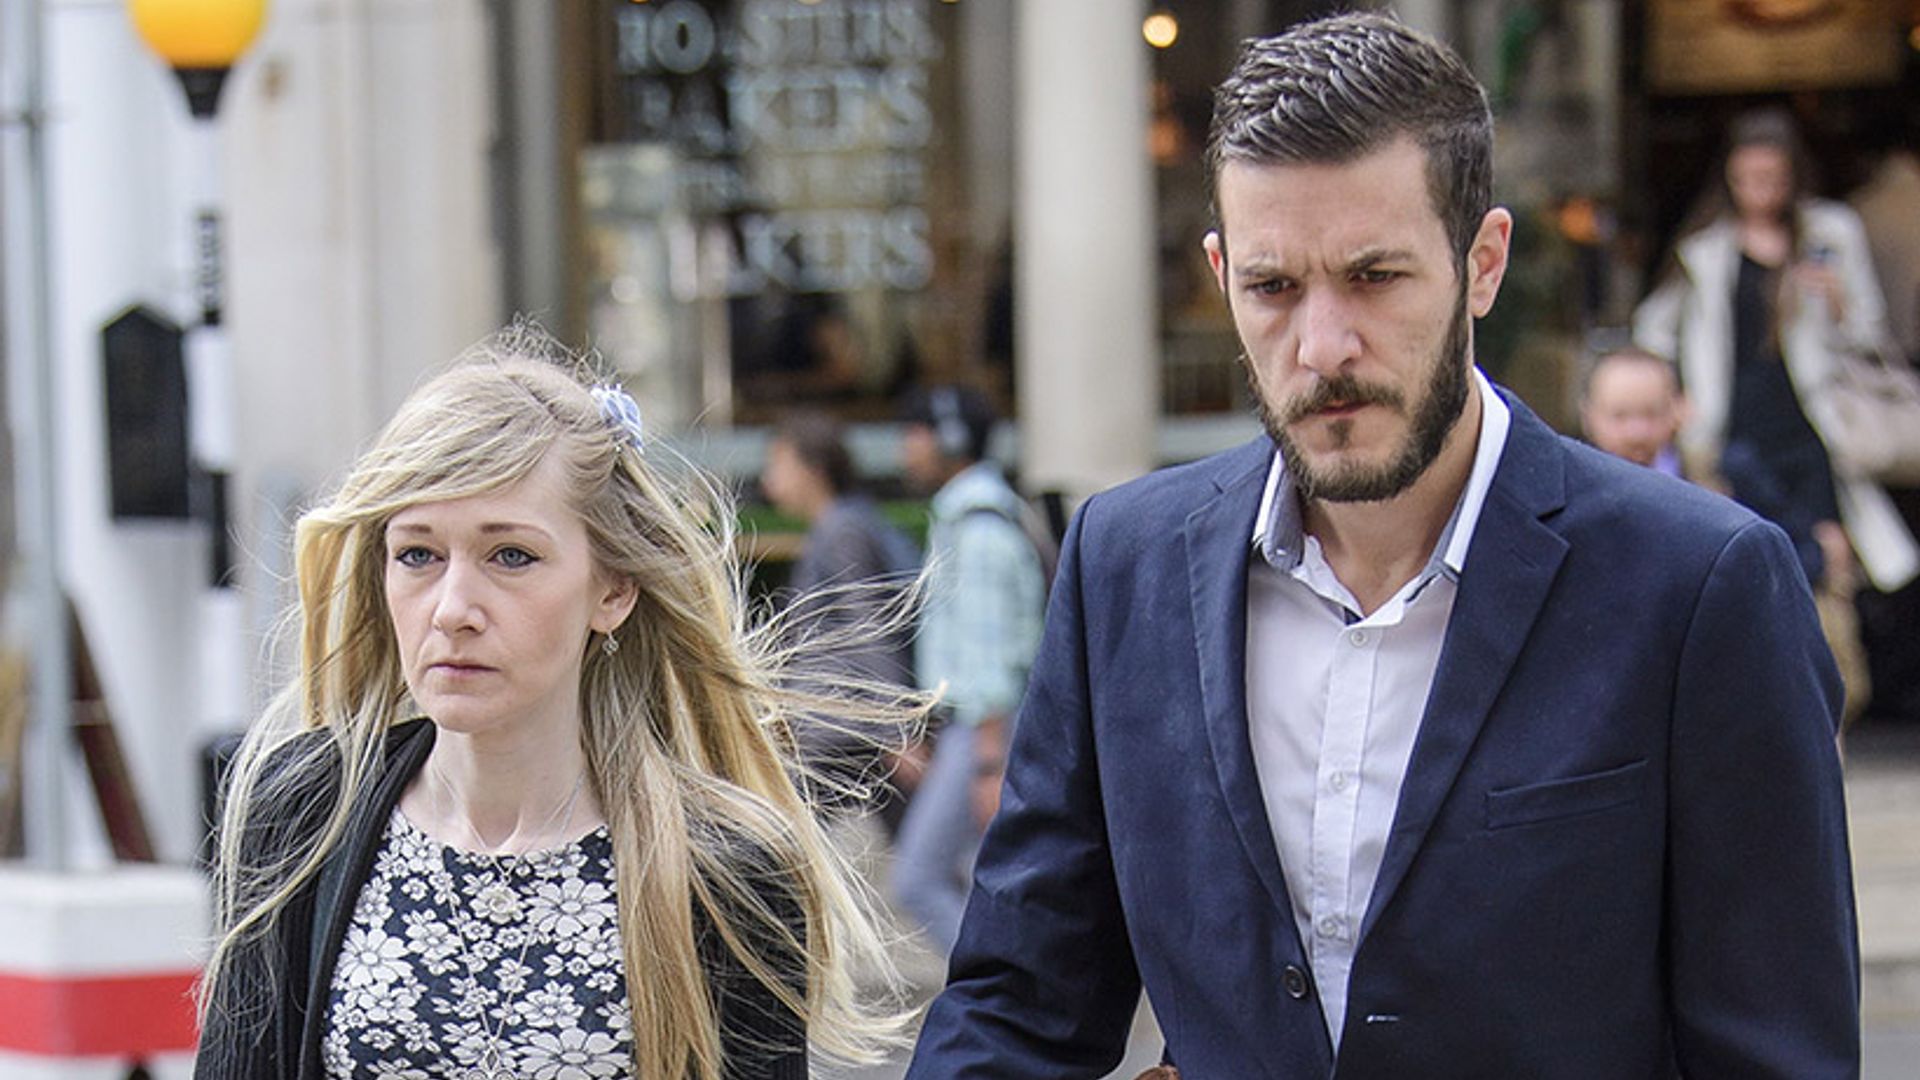 Charlie Gard has died, his parents confirm in a statement